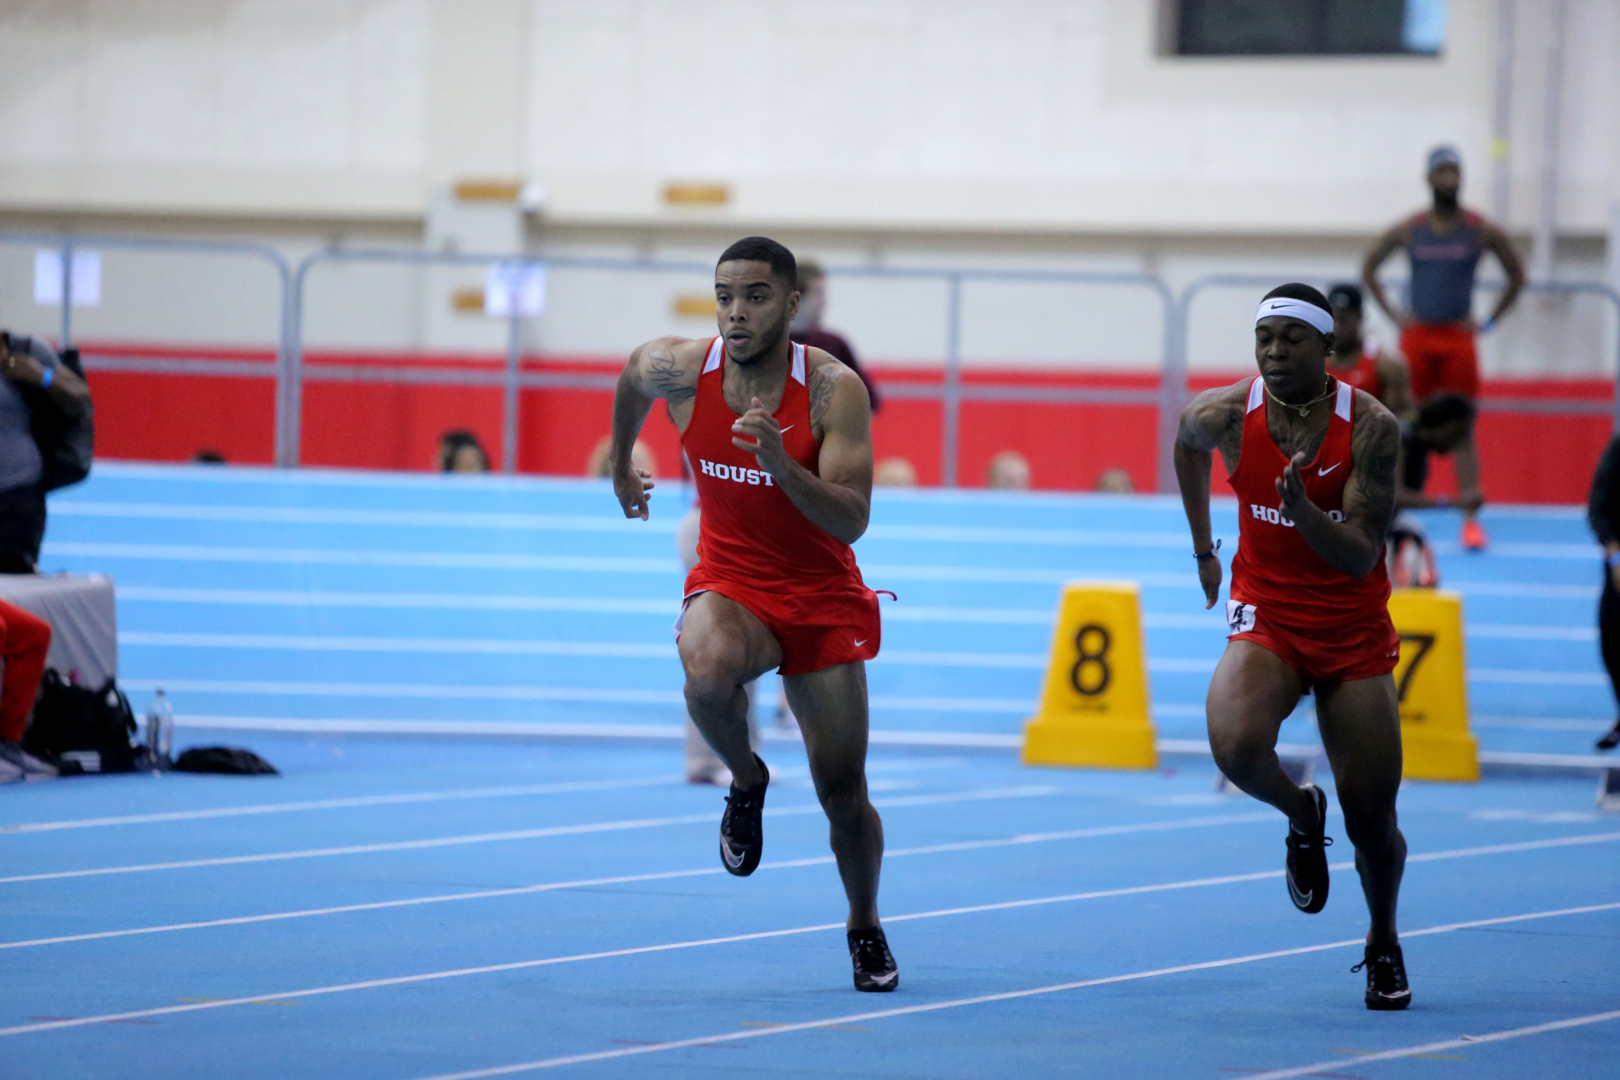 Senior sprinter Travis Collins was one of three Houston athletes from the men's track and field team that qualified for the NCAA Indoor competition in 2020. | Photo Courtesy of UH Athletics